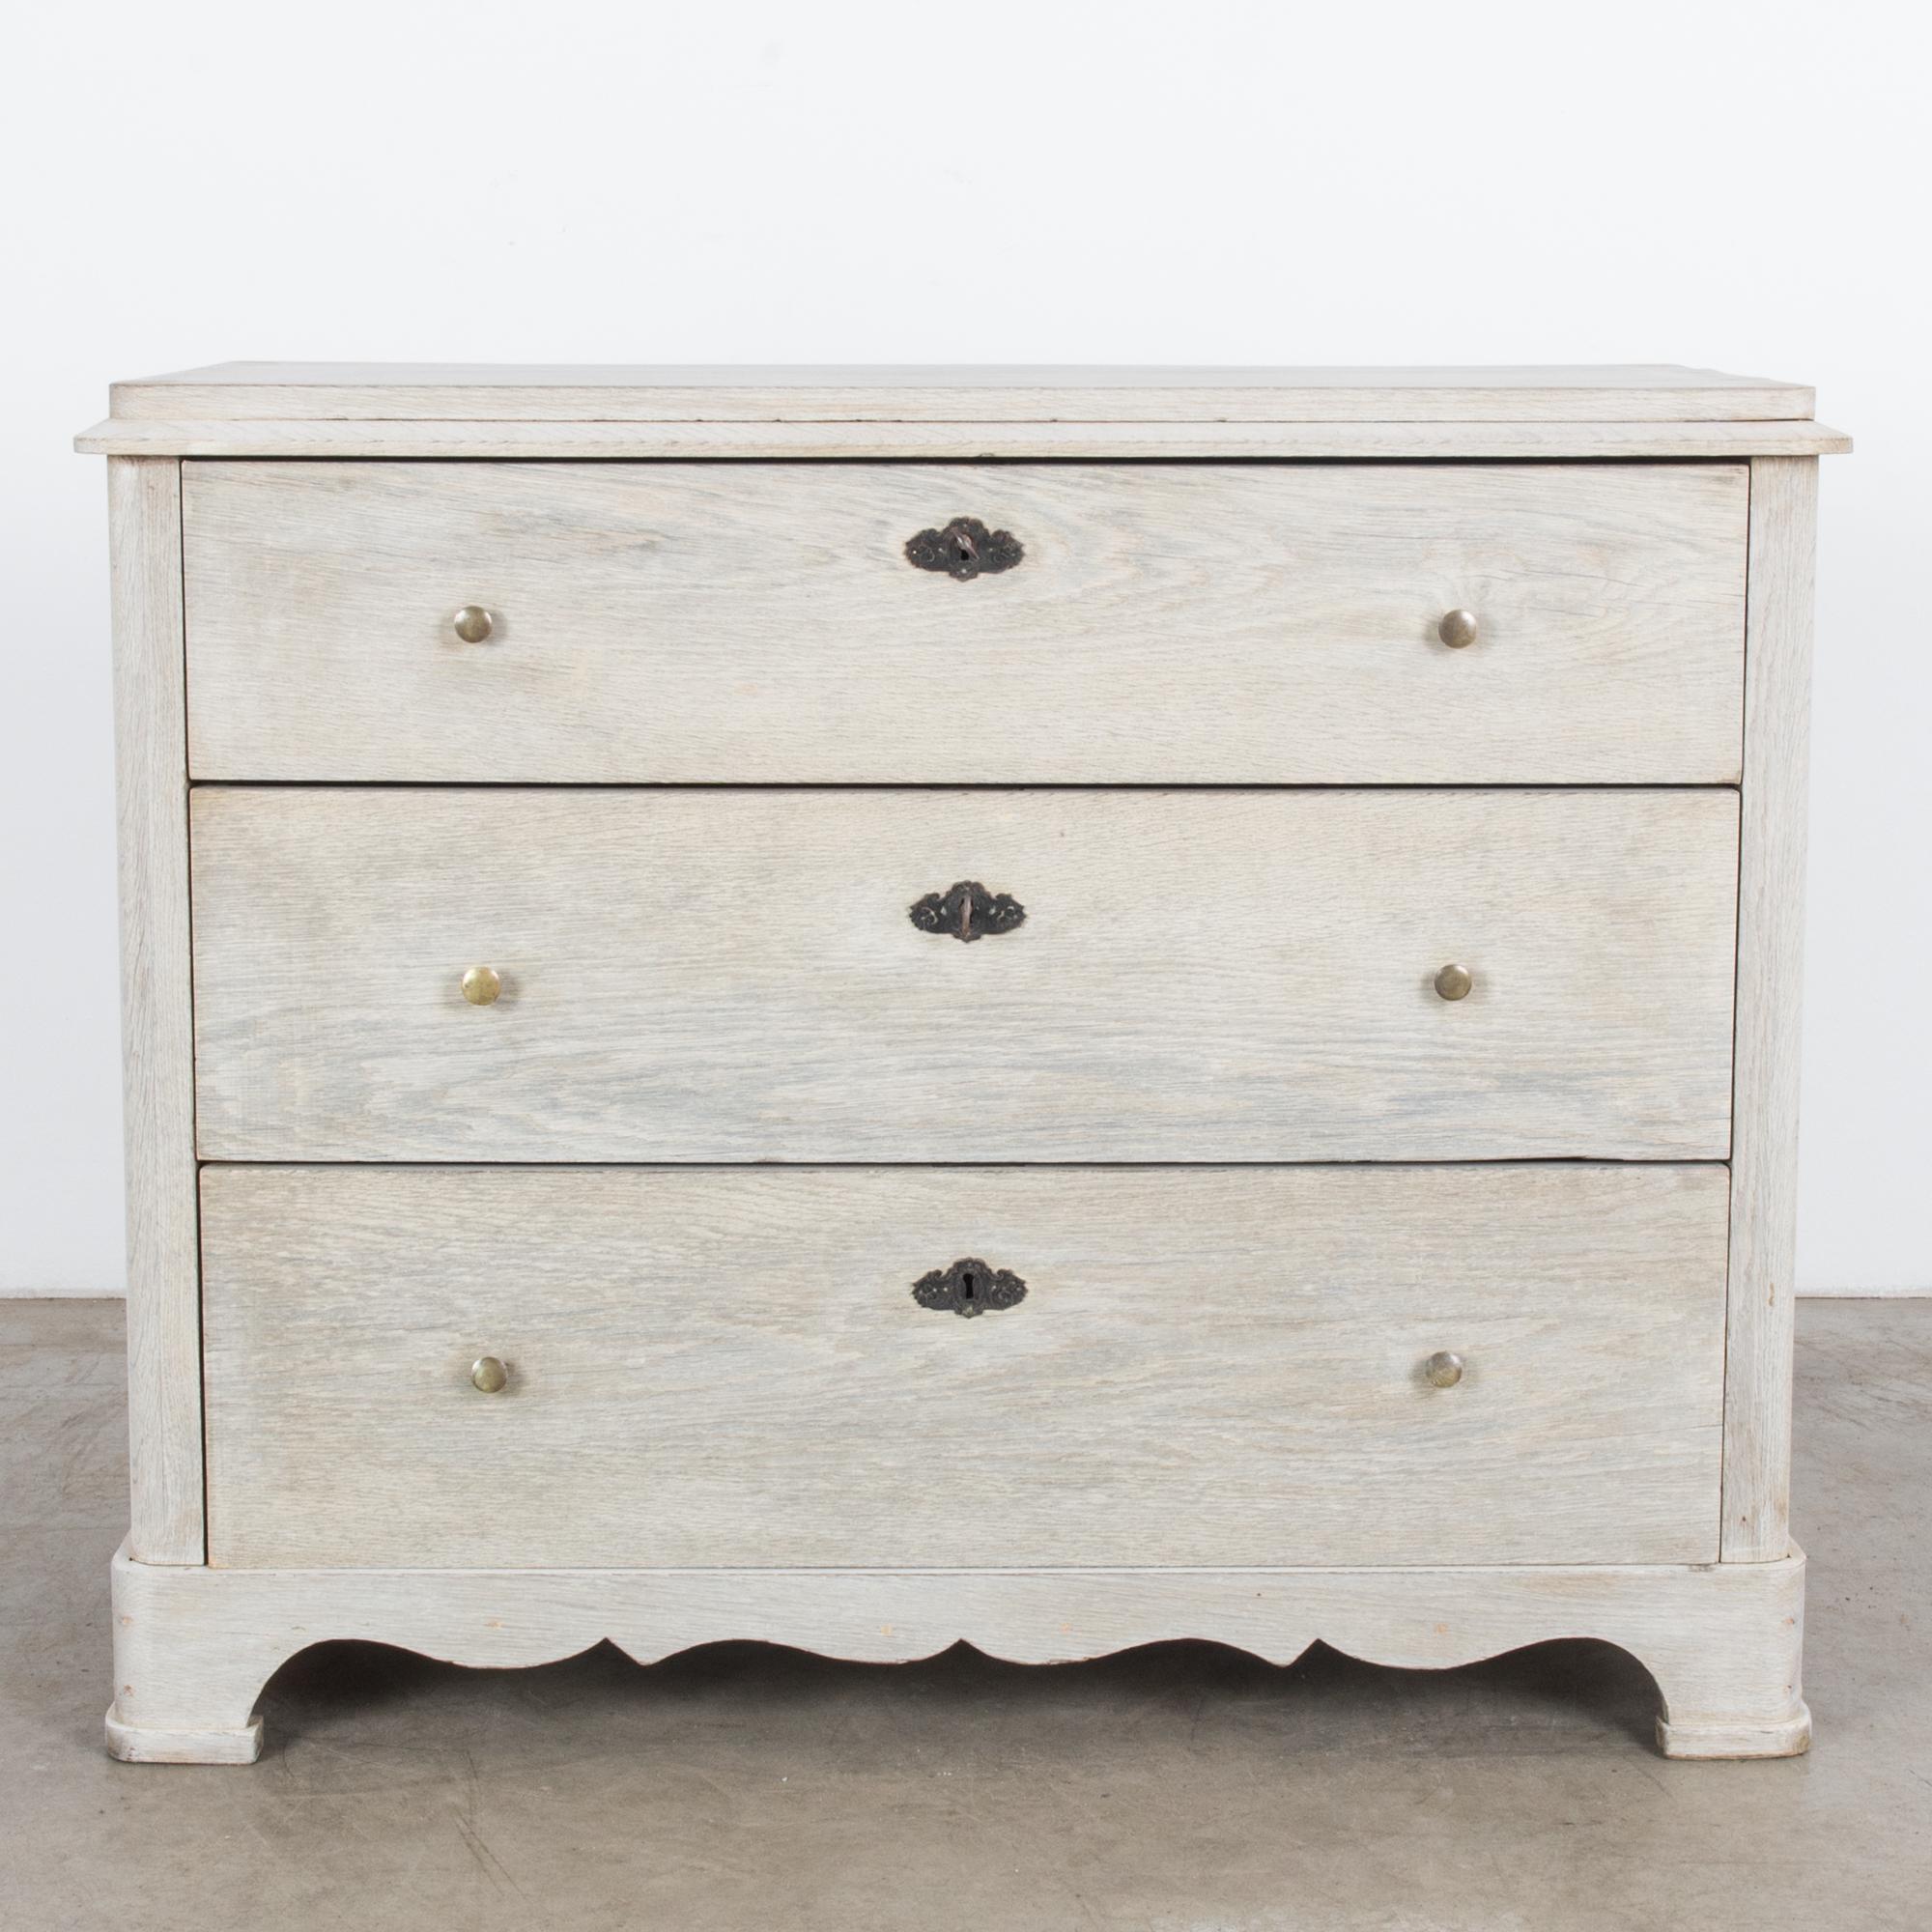 This bleached oak chest of drawers with a smooth finish was made in France, circa 1880. The drawers are slightly elevated, and the drawers feature decorative locks and circular pulls. The raised top and scalloped apron add style to this elegant